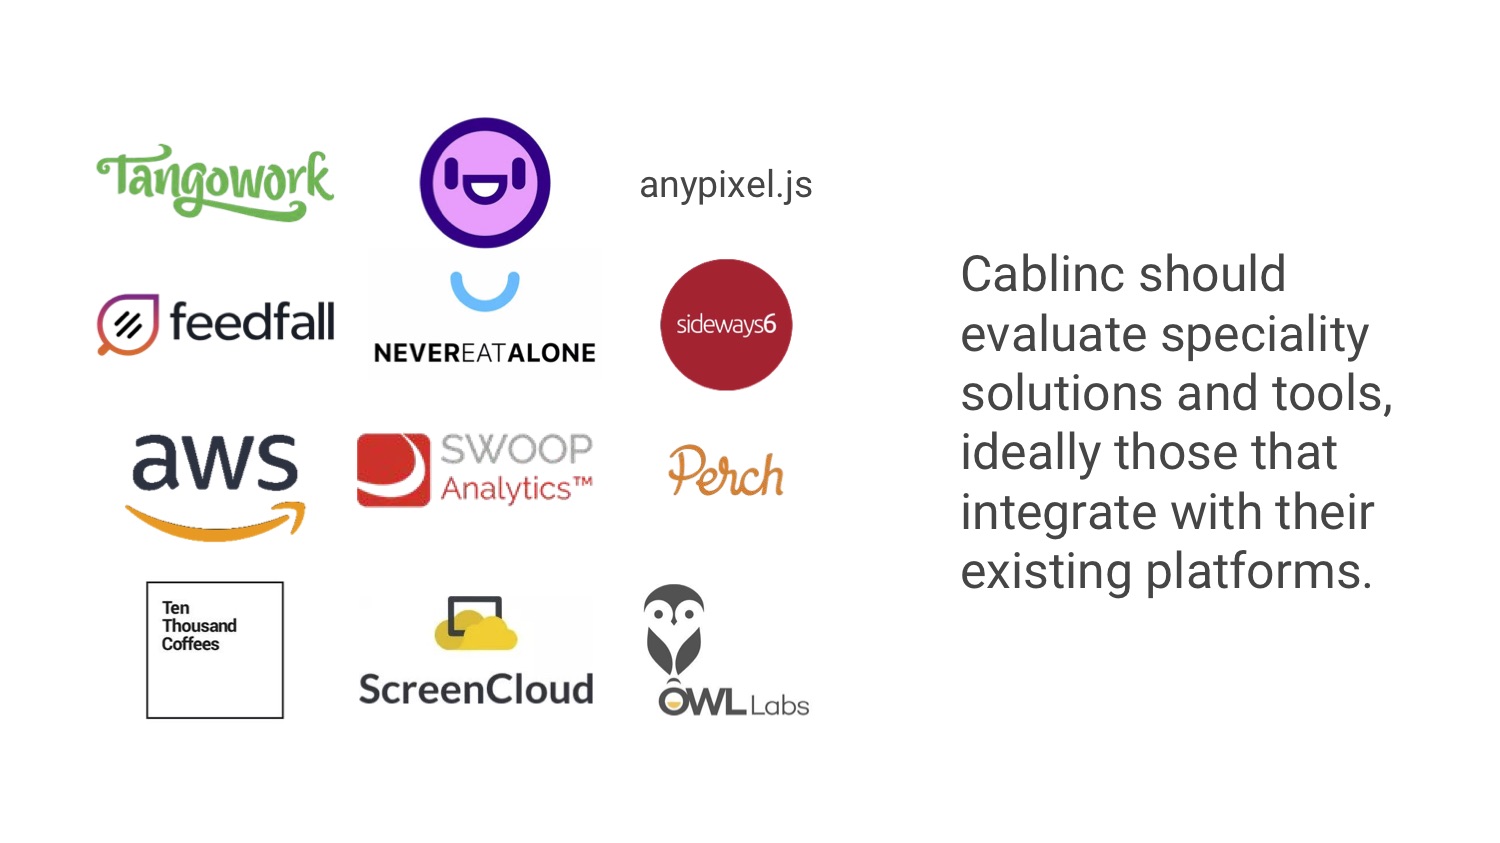 Cablinc should evaluate speciality solutions and tools, ideally those that integrate with their existing platforms